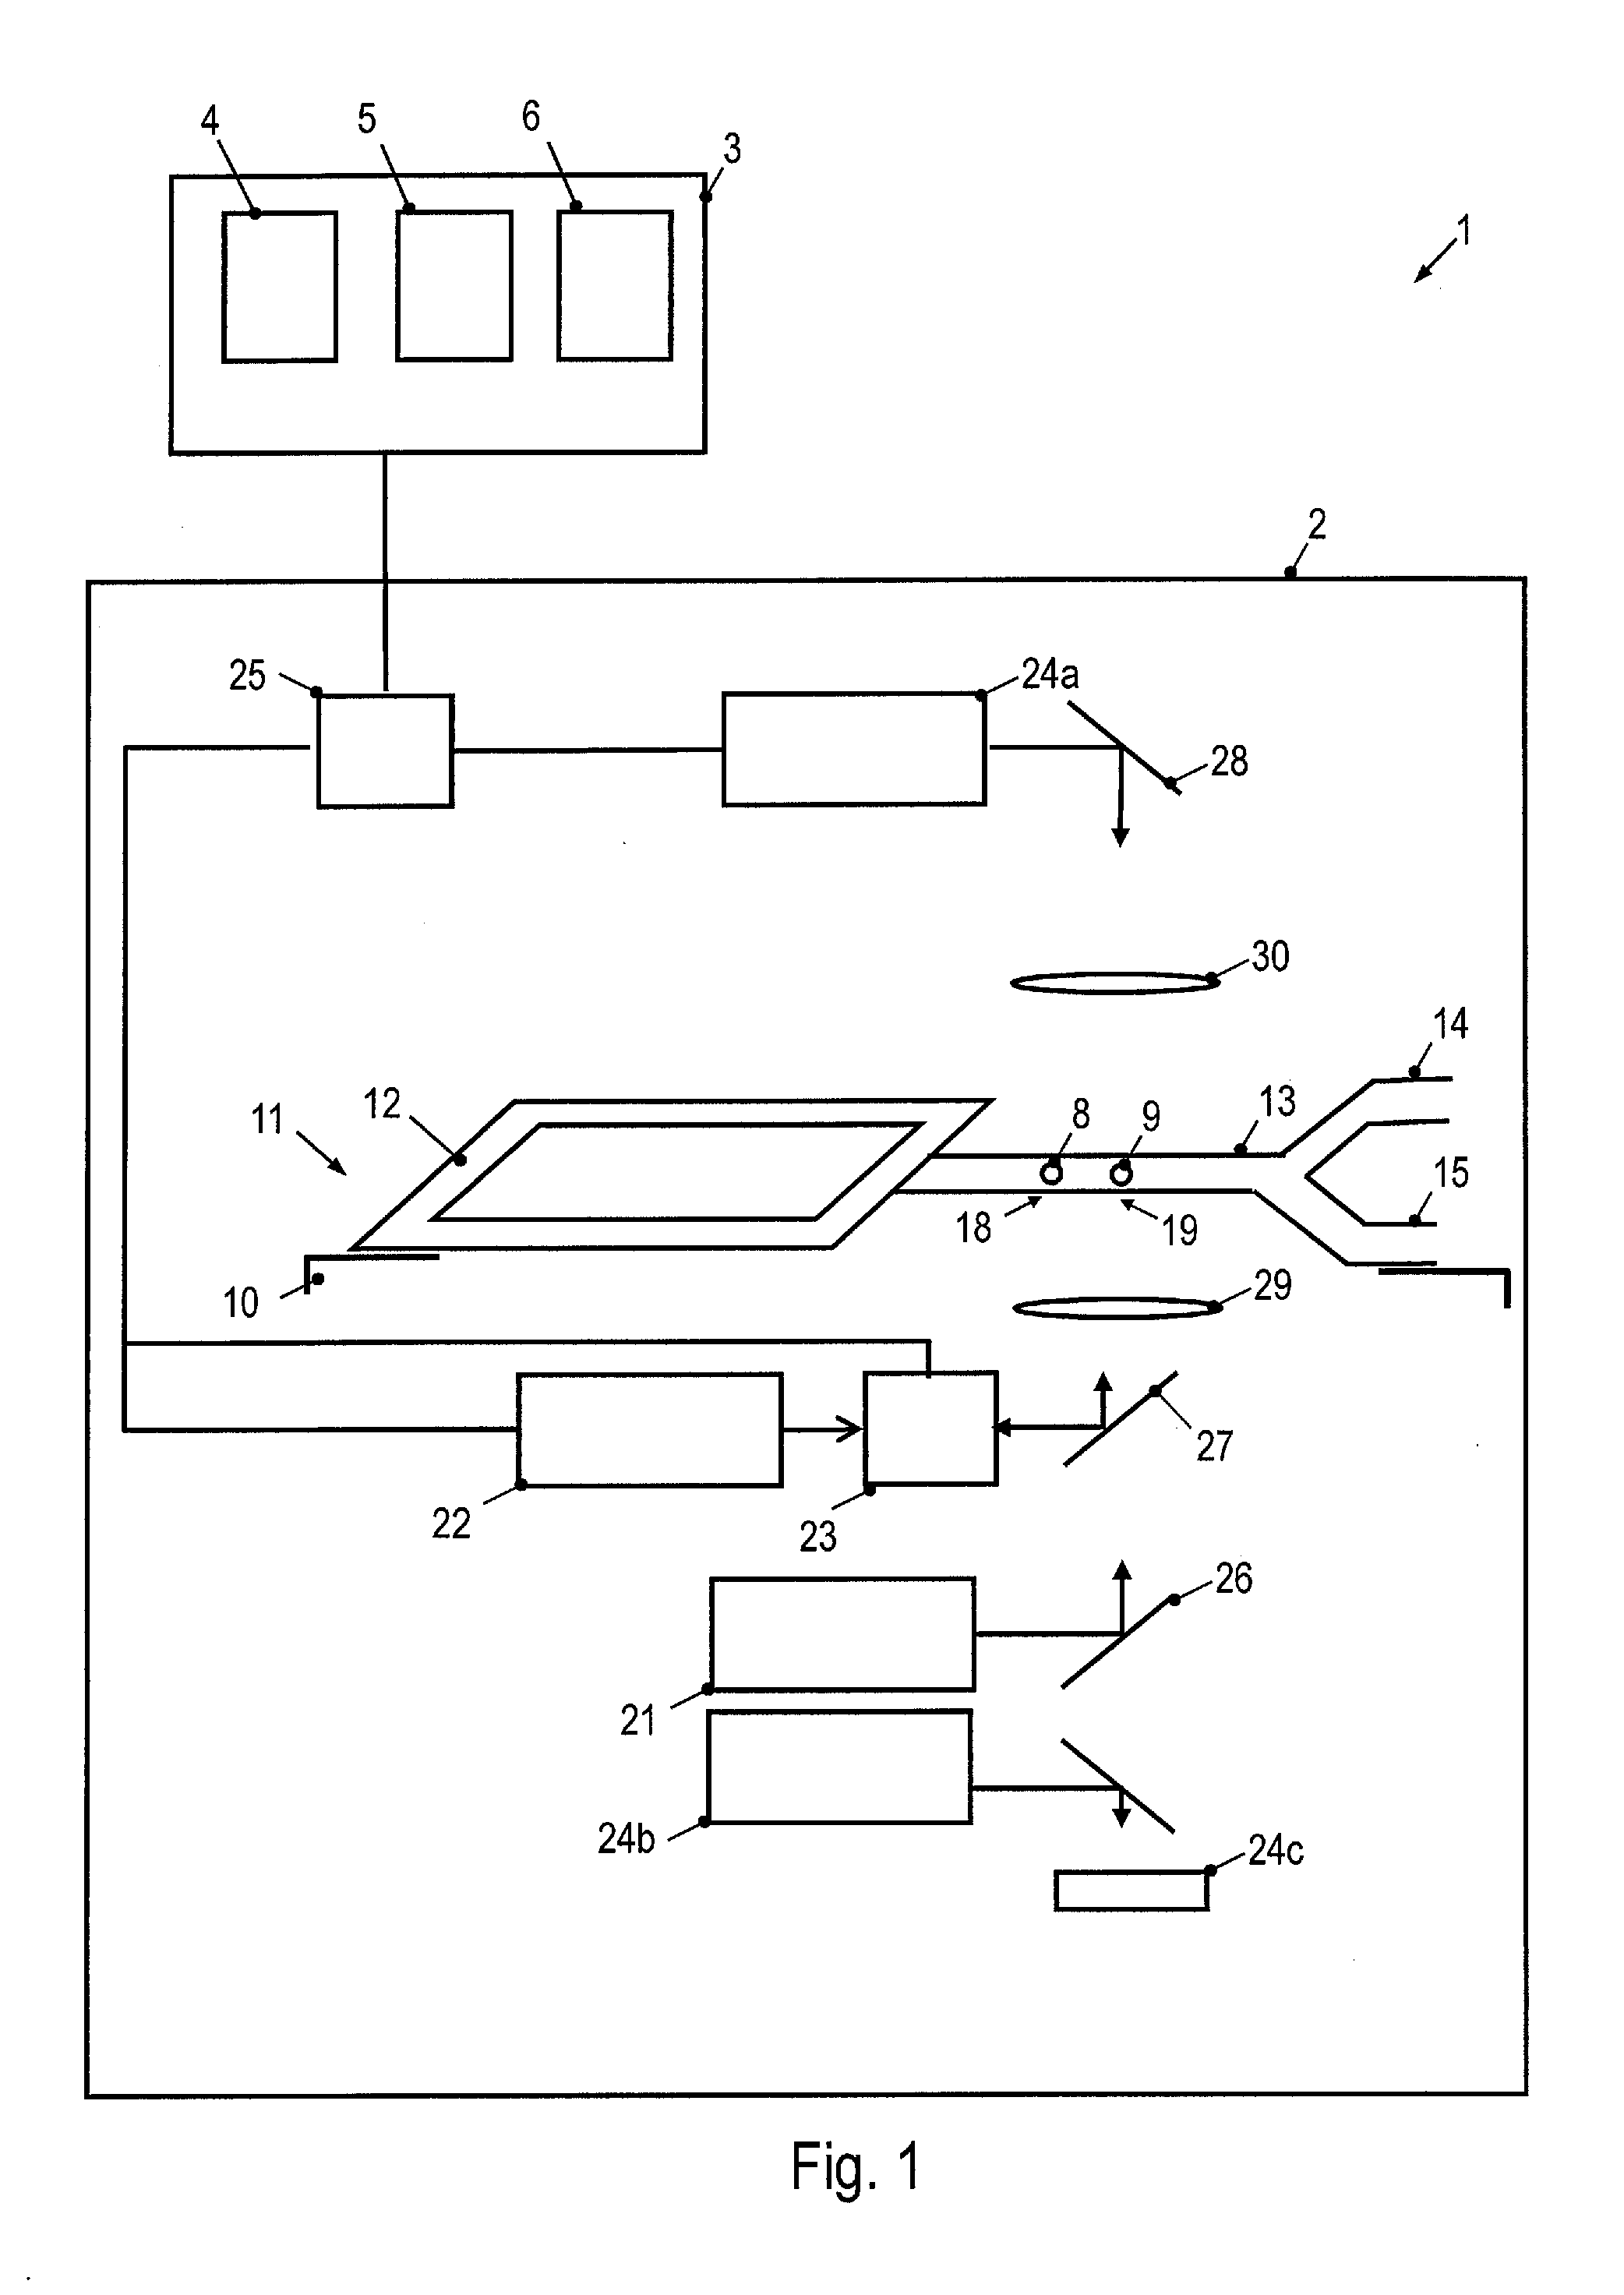 Method and apparatus for characterizing biological objects